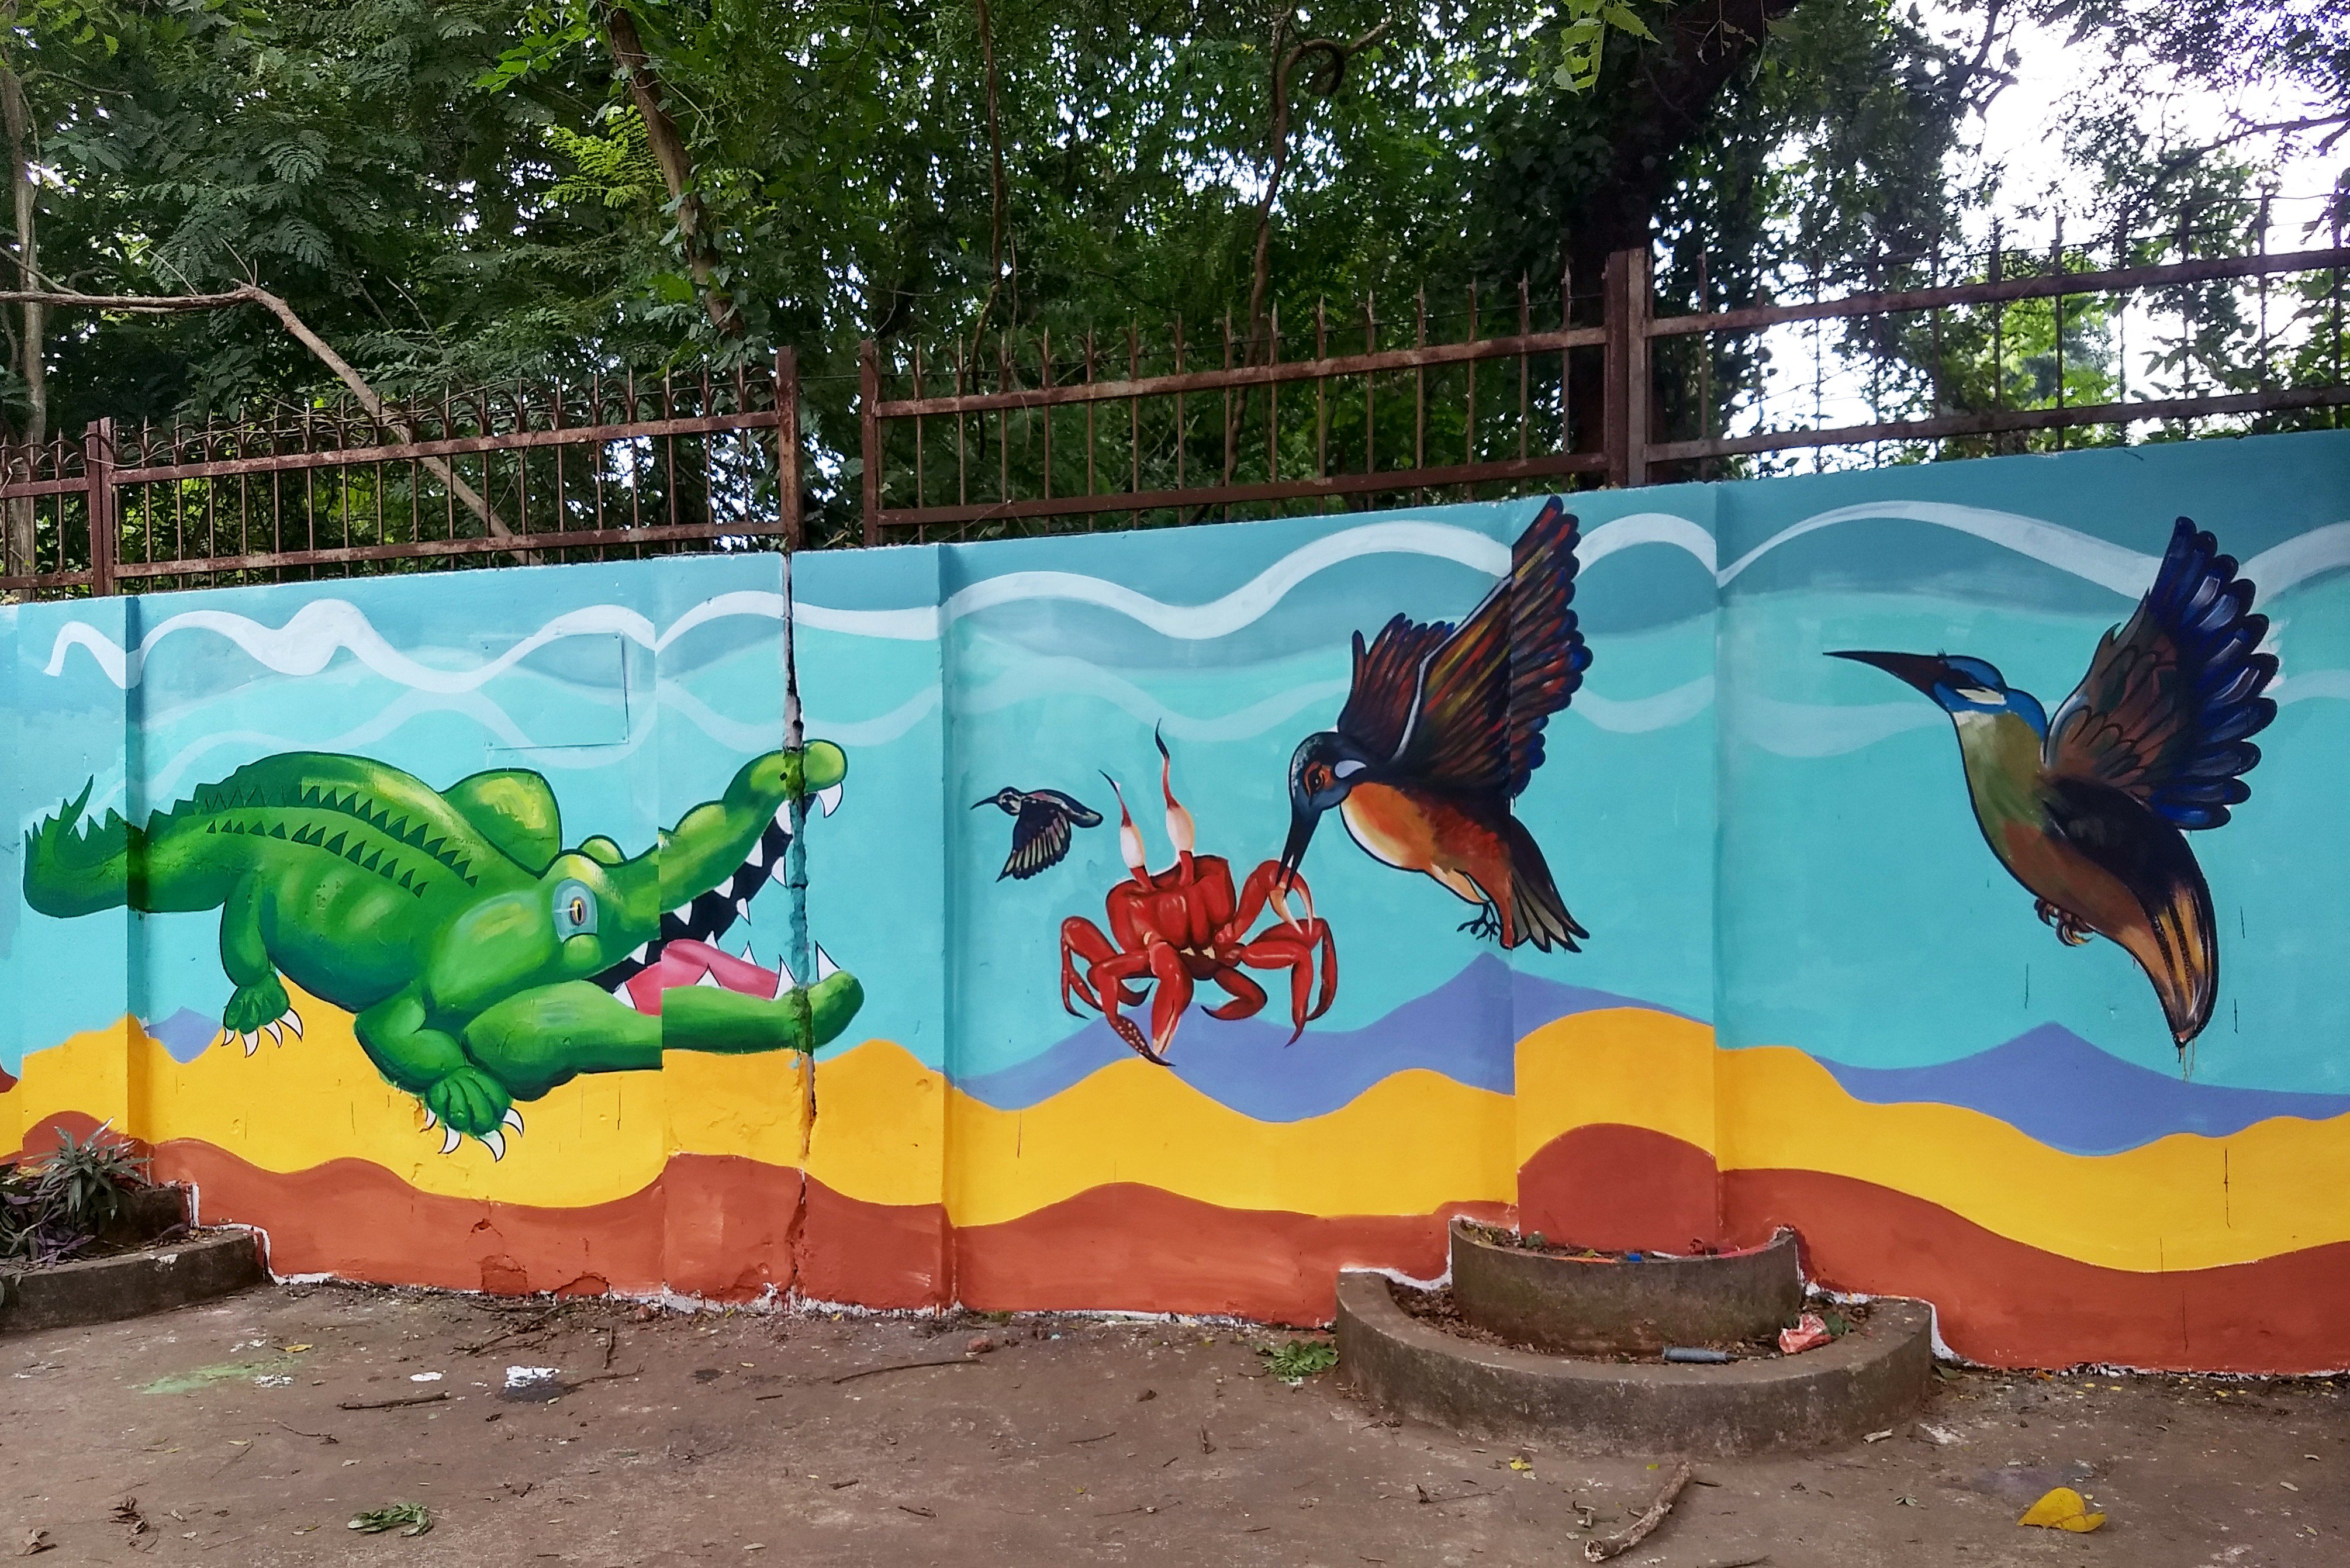 Bmc Under The Street Art Murals Project Stamp By Bmc Walls Across Major Streets Of Bhubaneswar Are Painted Ahead Of The Hwc18 It Includes Theme Based Paintings In Many Stretches